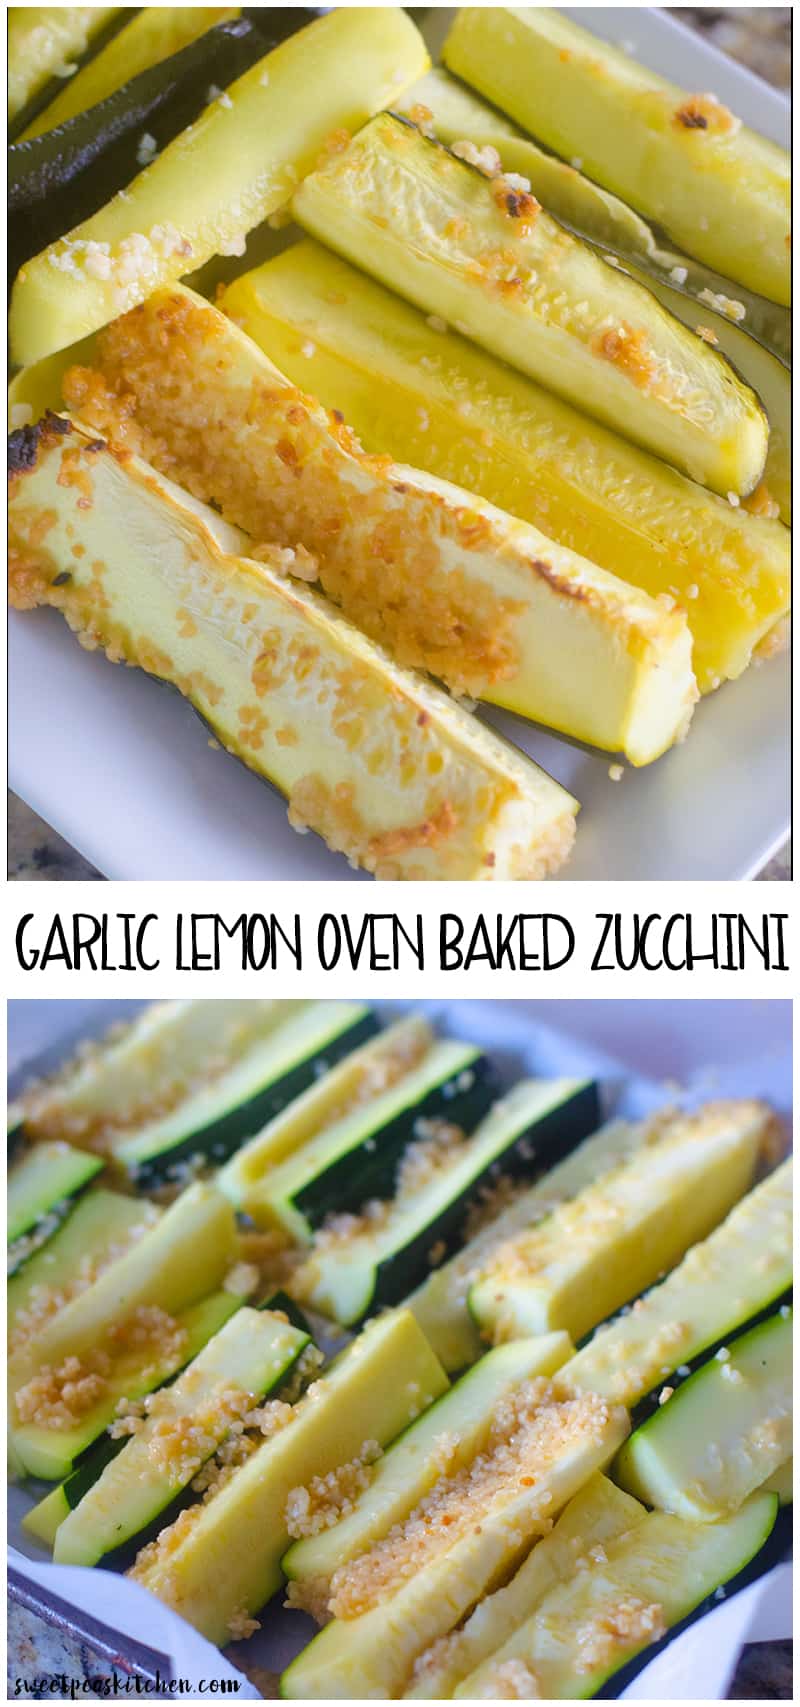 Oven Baked Zucchini